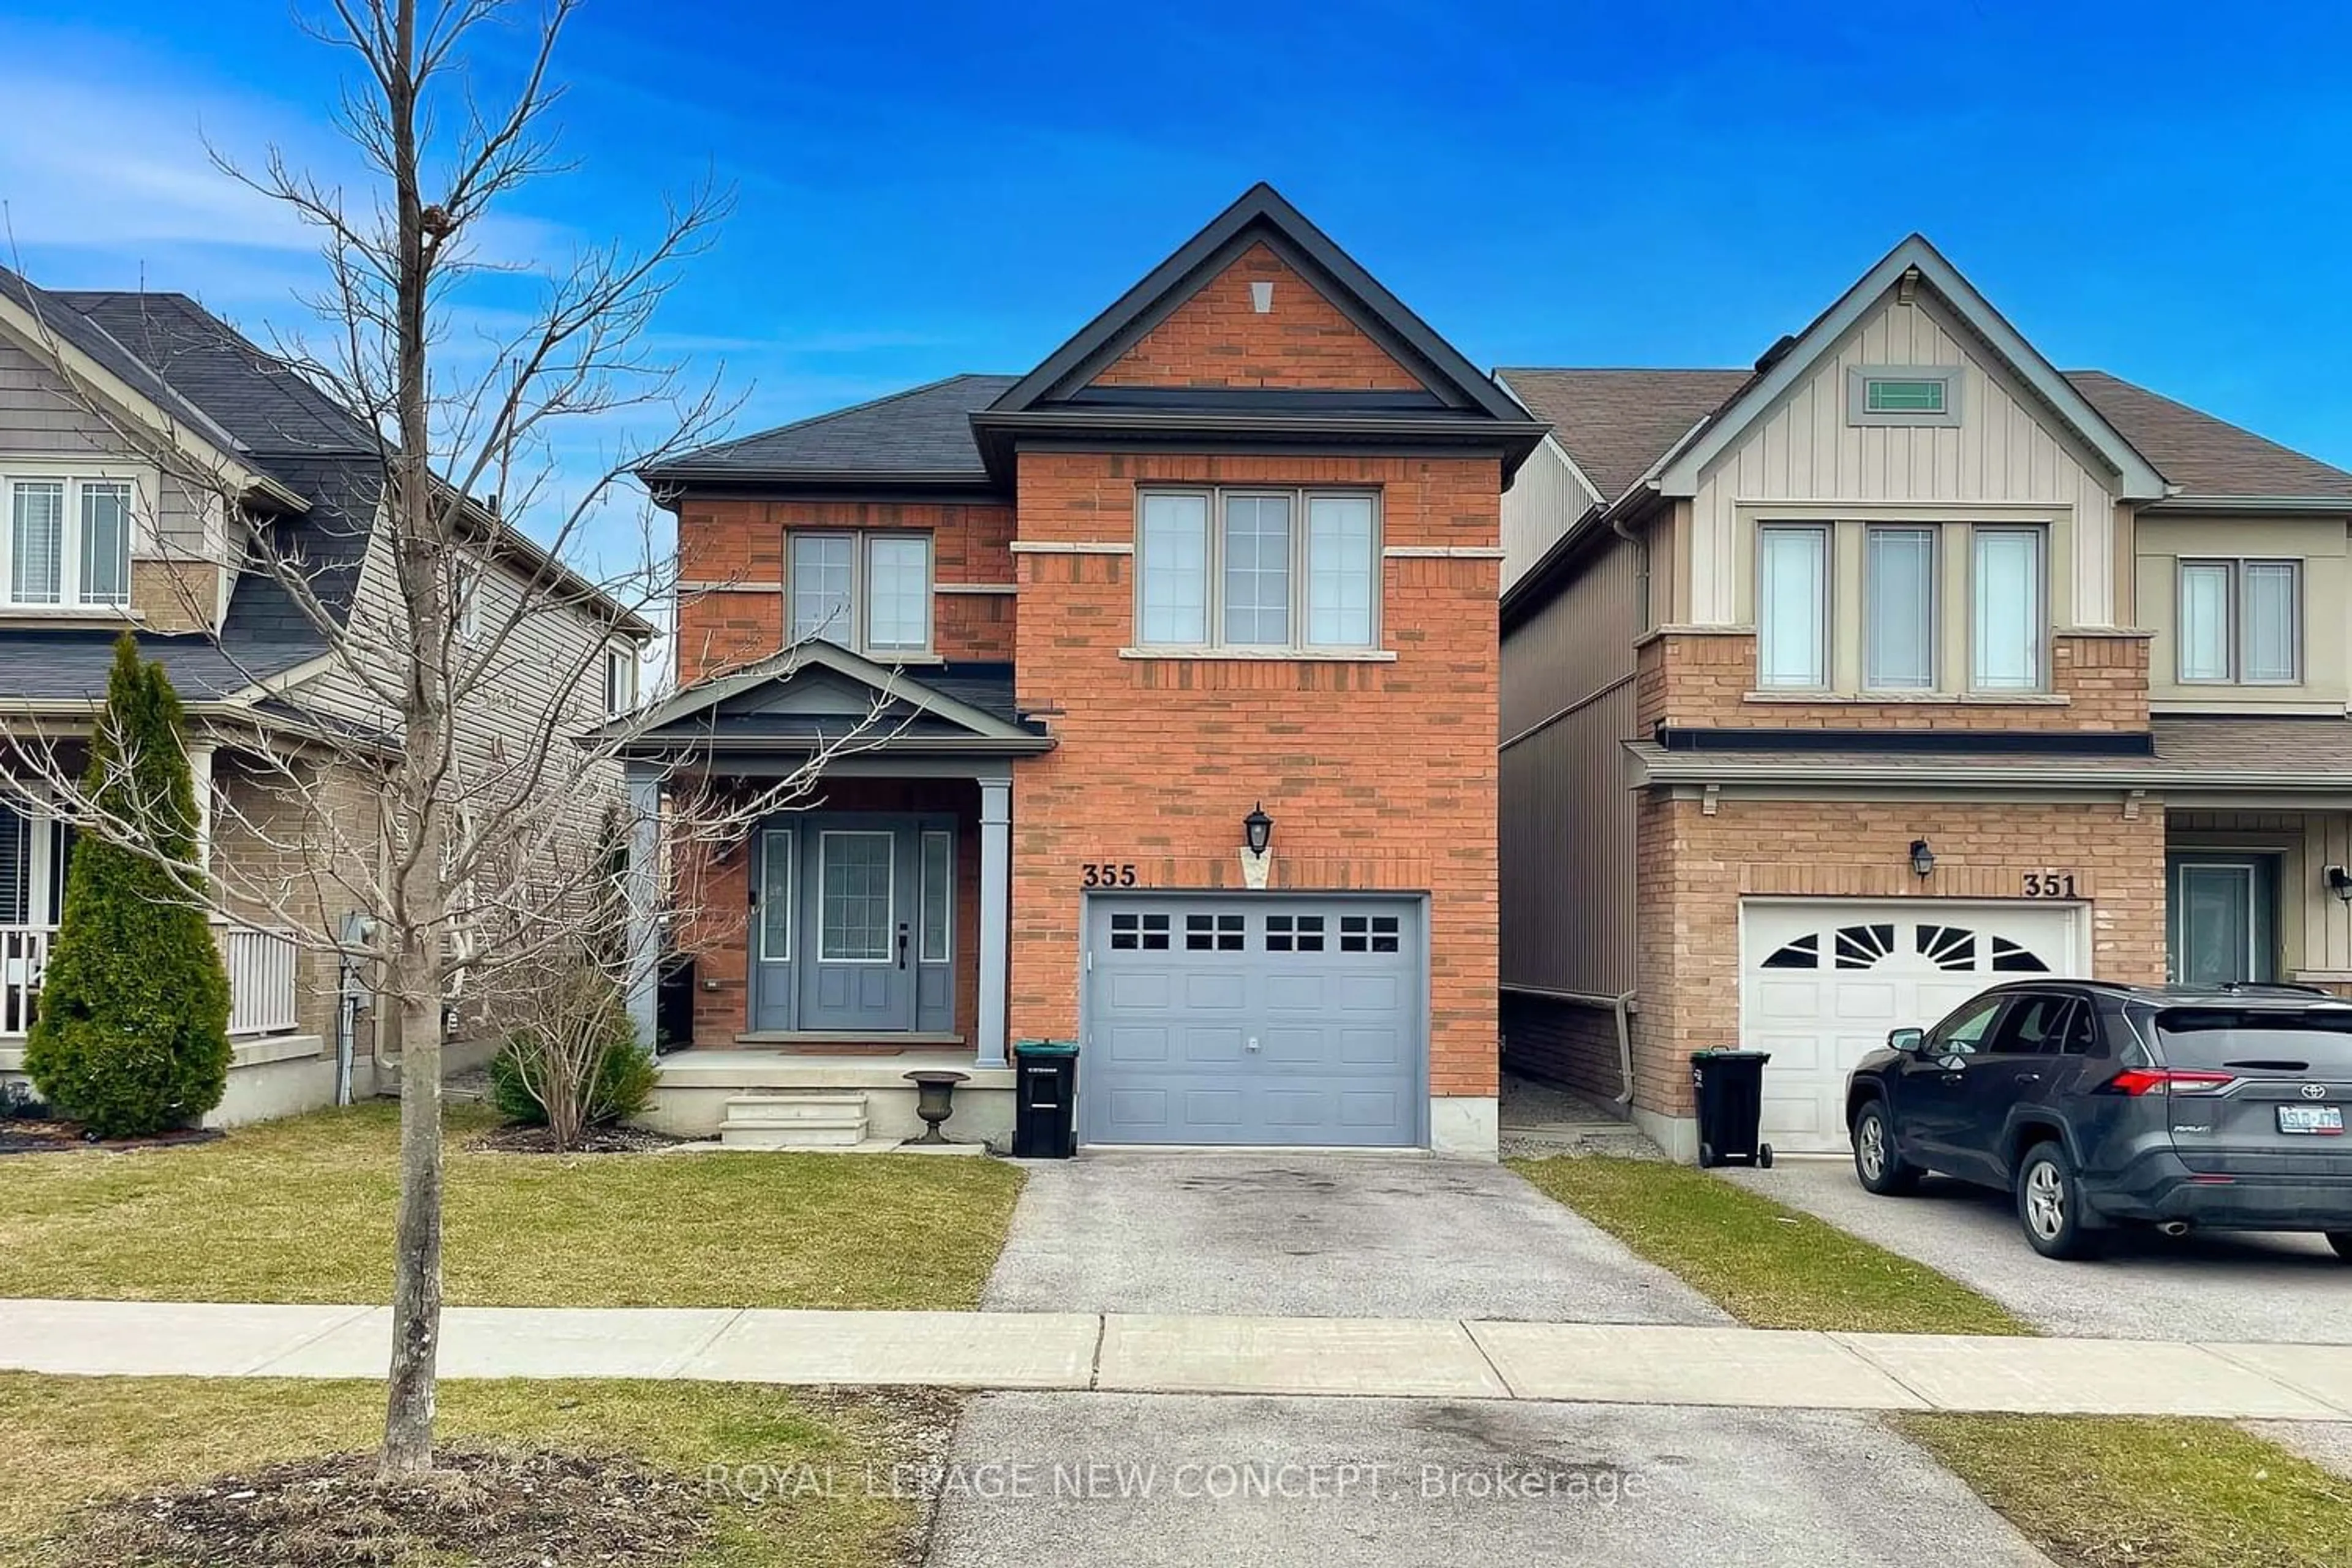 Home with brick exterior material for 355 Langford Blvd, Bradford West Gwillimbury Ontario L3Z 0P7